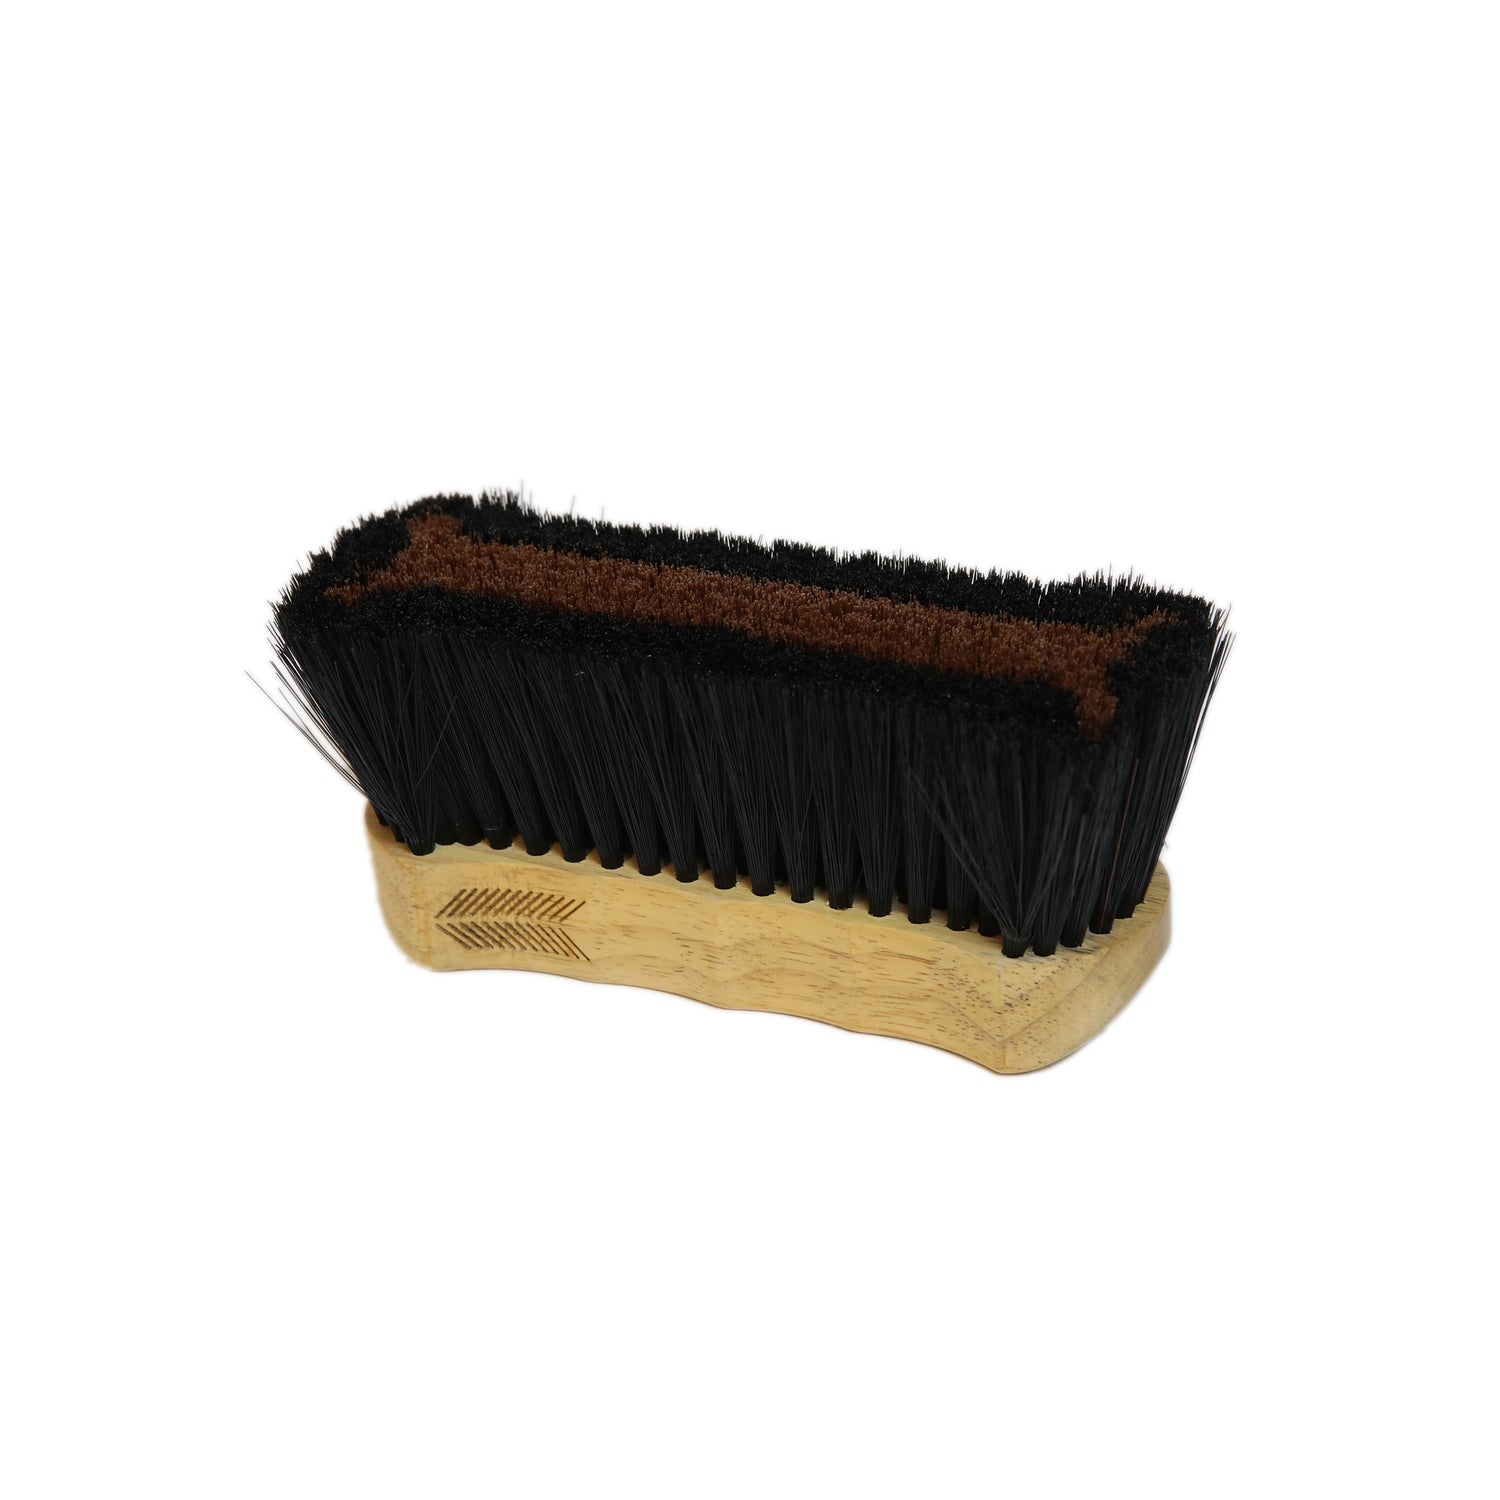 The Kentucky body brush. The outer if the brush is made with brown bristles to help remove the dirt and hairs that has been loosened up. The polypropylene bristles are hard, ideal to use in the winter, when the coat is thicker, or on a muddy horse. The brown bristles in the centre are also smoother, for a better action of the brush. Clean your brush by damping it into soapy warm water and make sure it lasts for a long time.